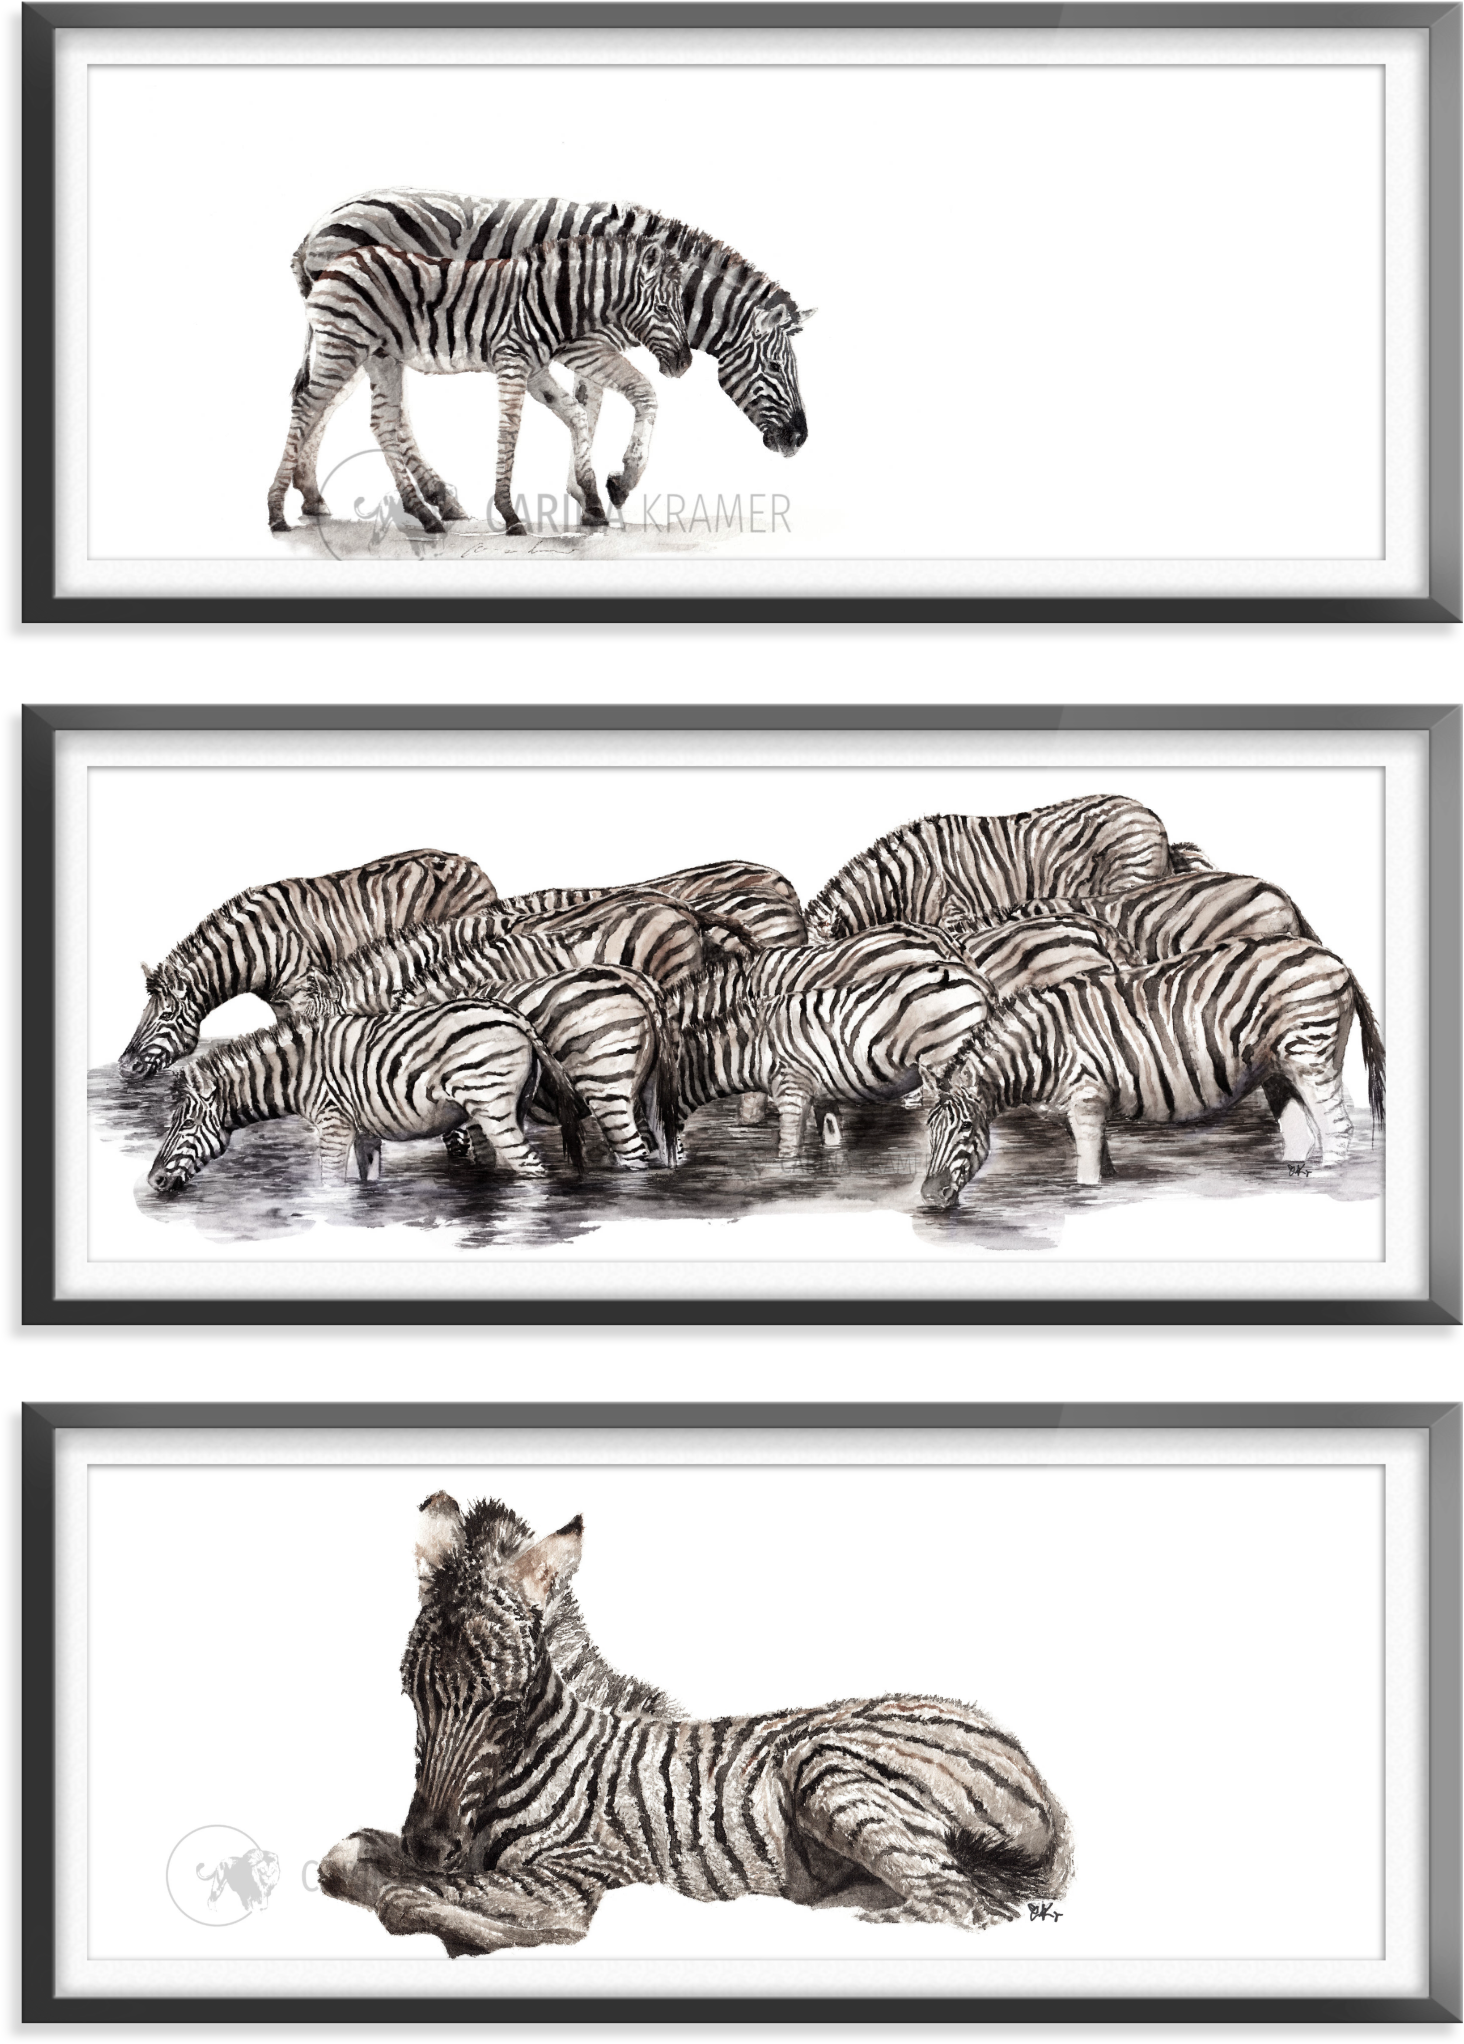 A Group Of Zebras Drinking Water